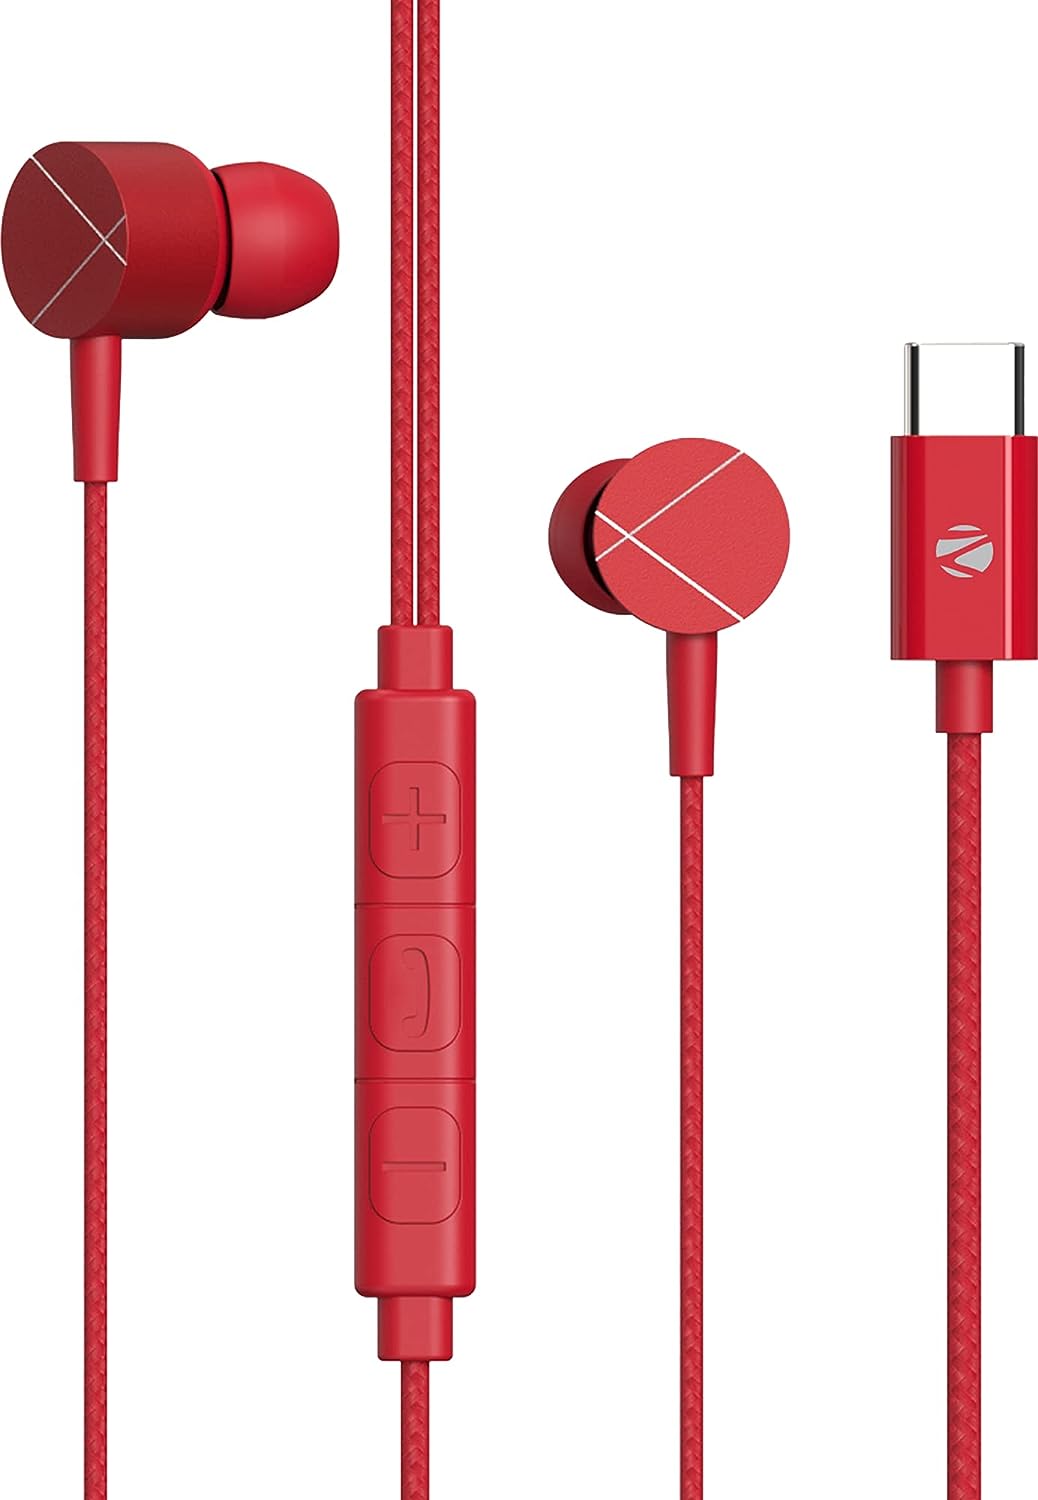 ZEBRONICS Zeb-Buds C2 in Ear Type C Wired Earphones with Mic, Braided 1.2 Metre Cable, Metallic Design, 10mm Drivers, in Line Mic & Volume Controller (Red)